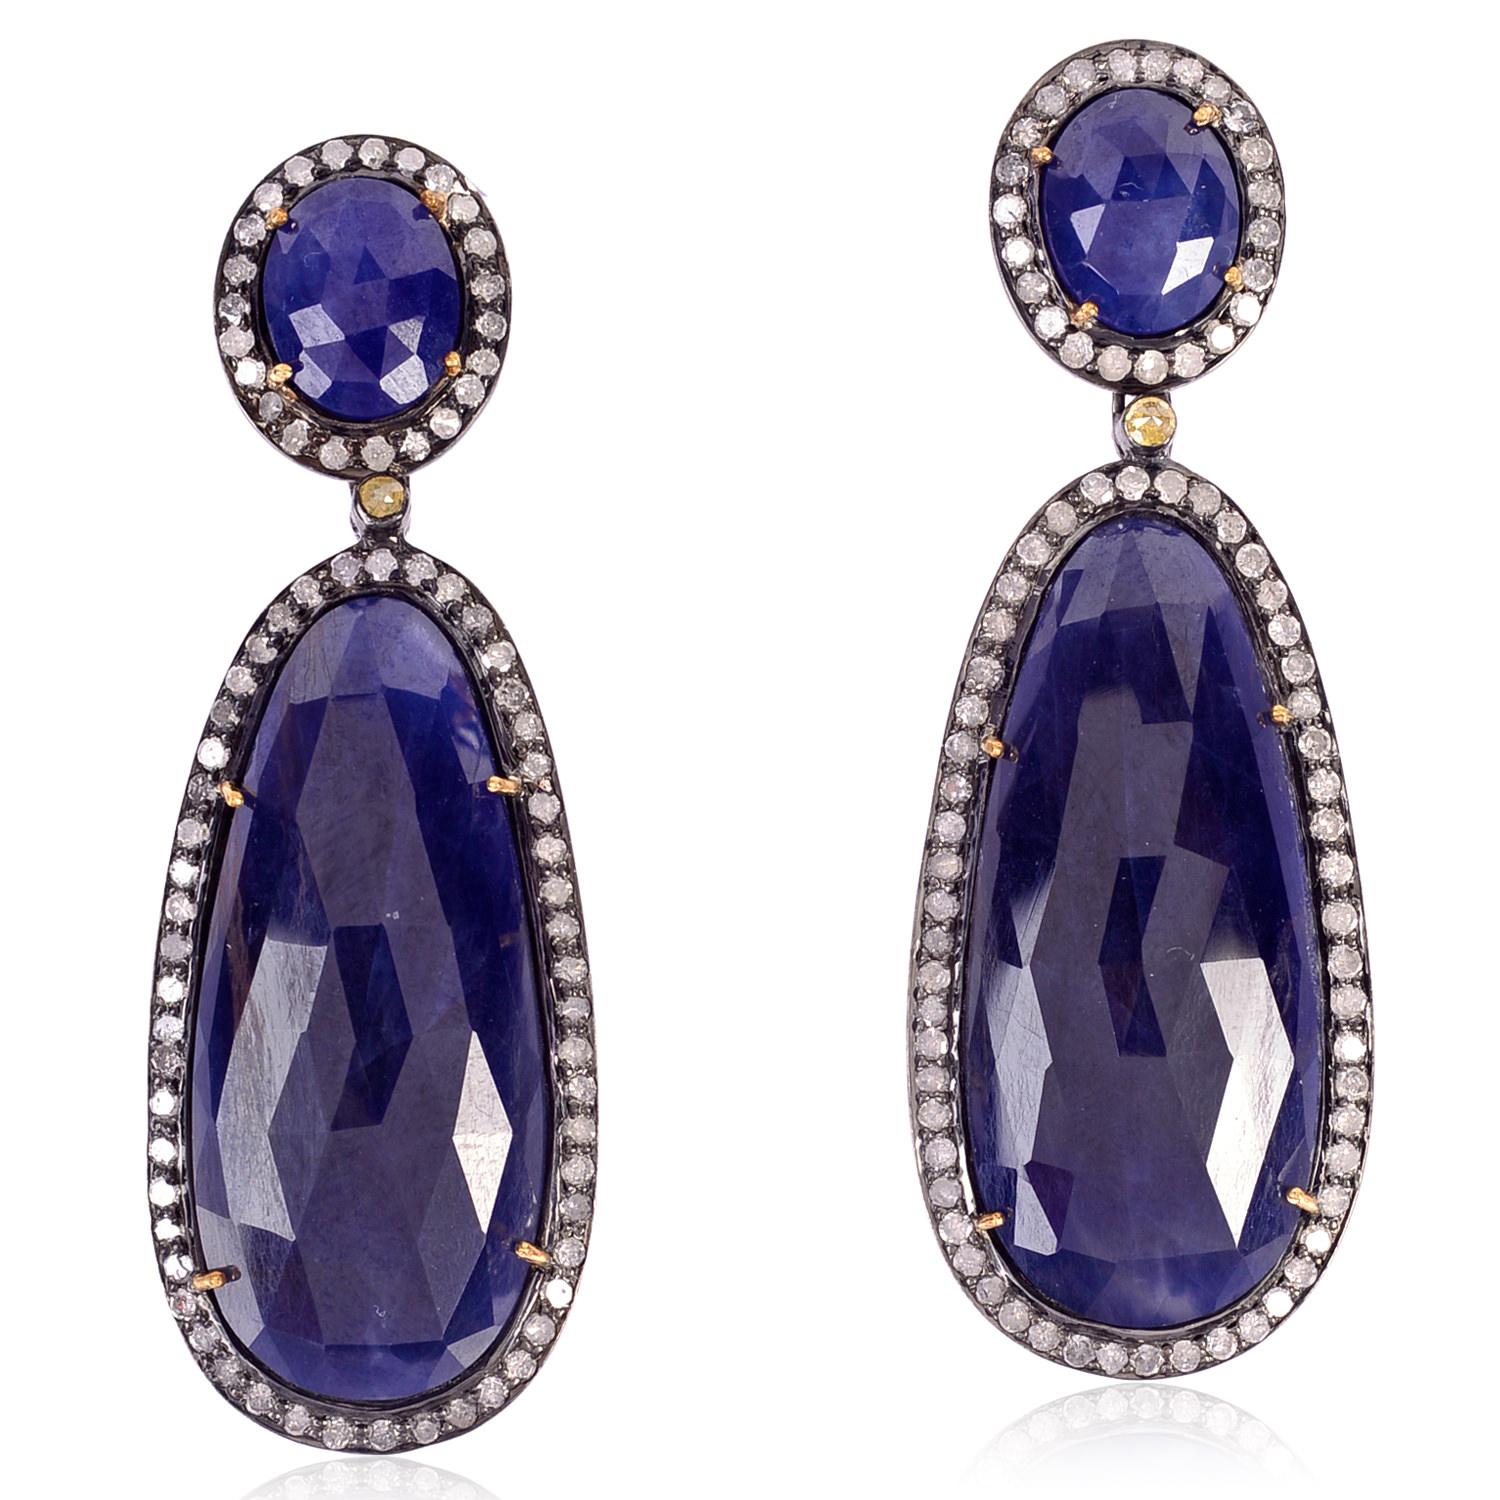 Oval & Drop Shaped Sapphire Earrings with Pave Diamonds in 18k Gold & Silver In New Condition For Sale In New York, NY